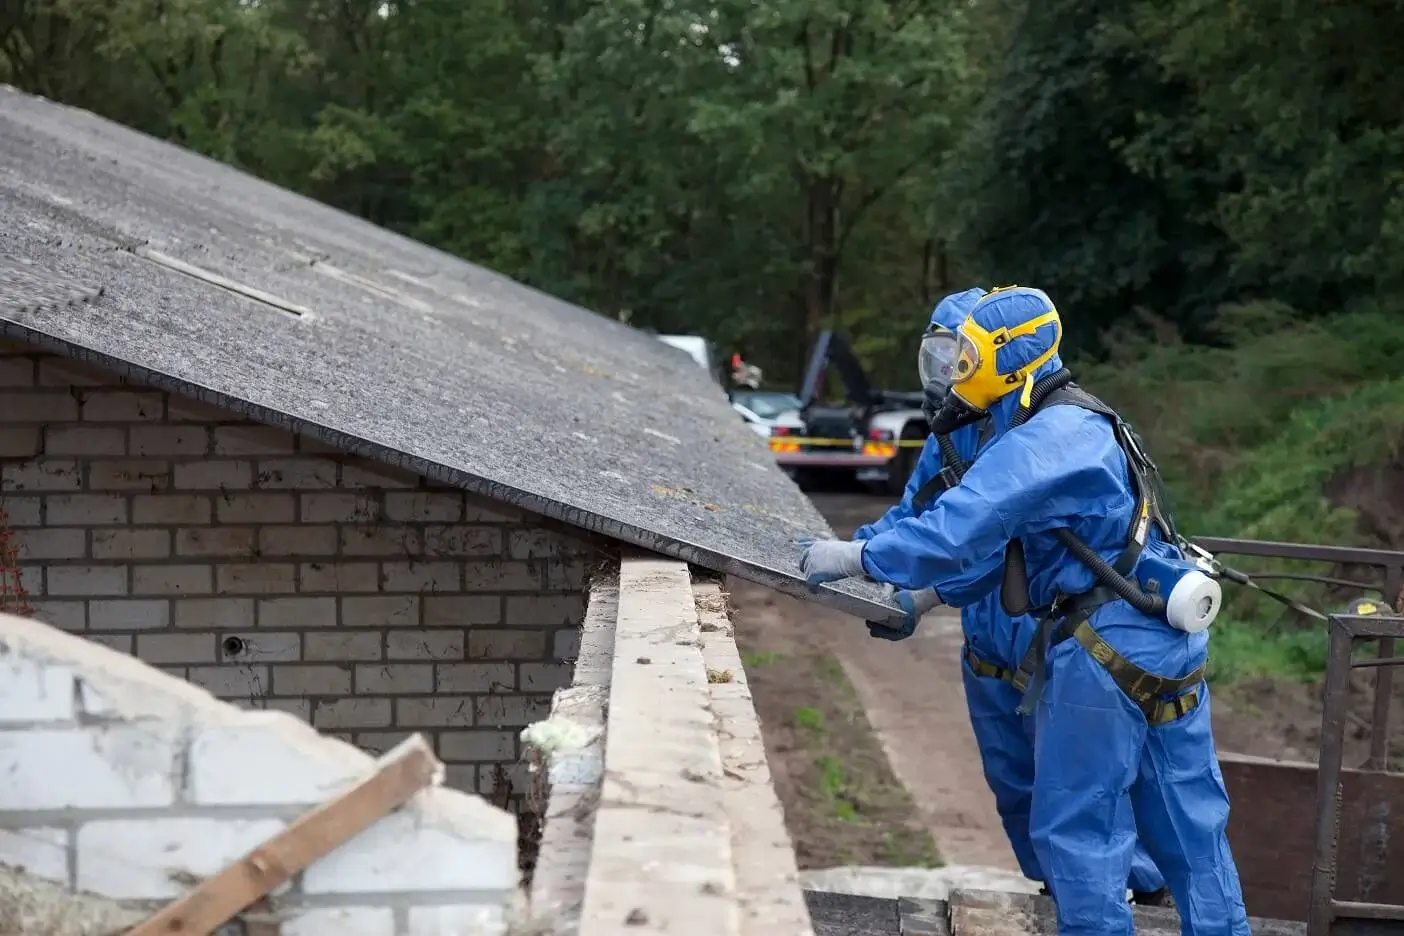 Asbestos Roof Removal Services